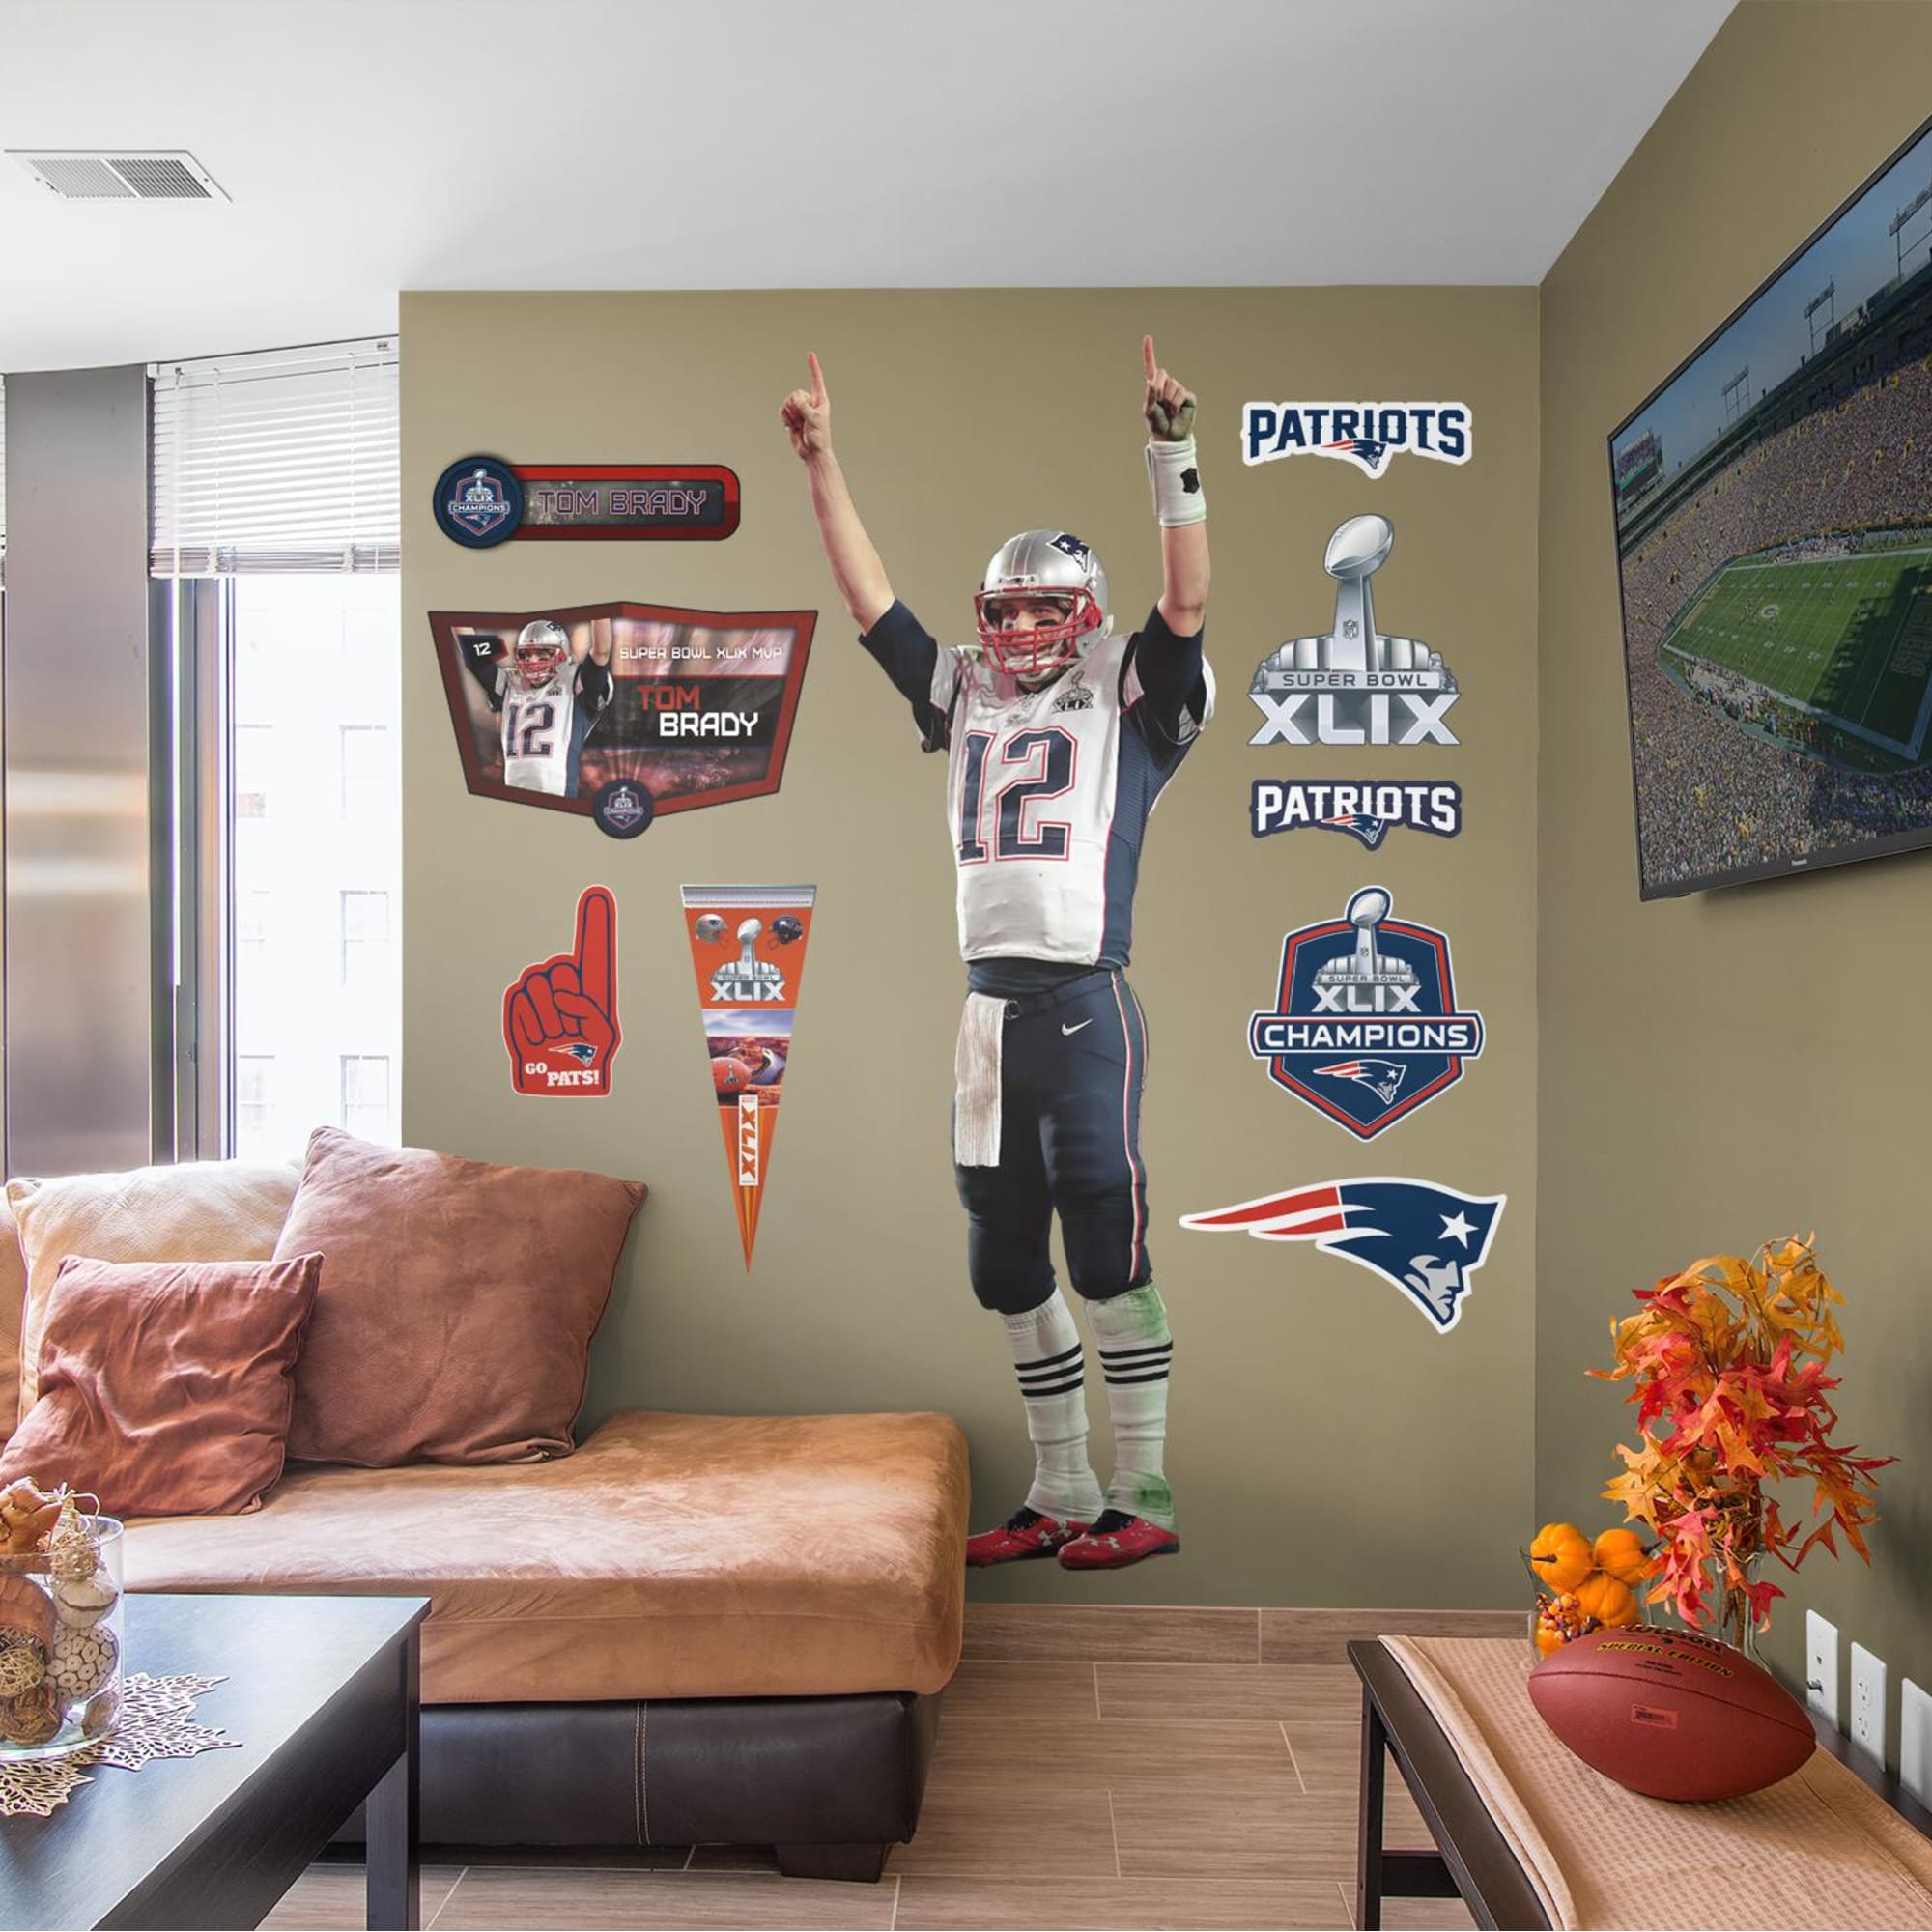 Tampa Bay Buccaneers: Tom Brady Super Bowl Lv Celebration Mural -  Officially Licensed NFL Removable Wall Adhesive Decal